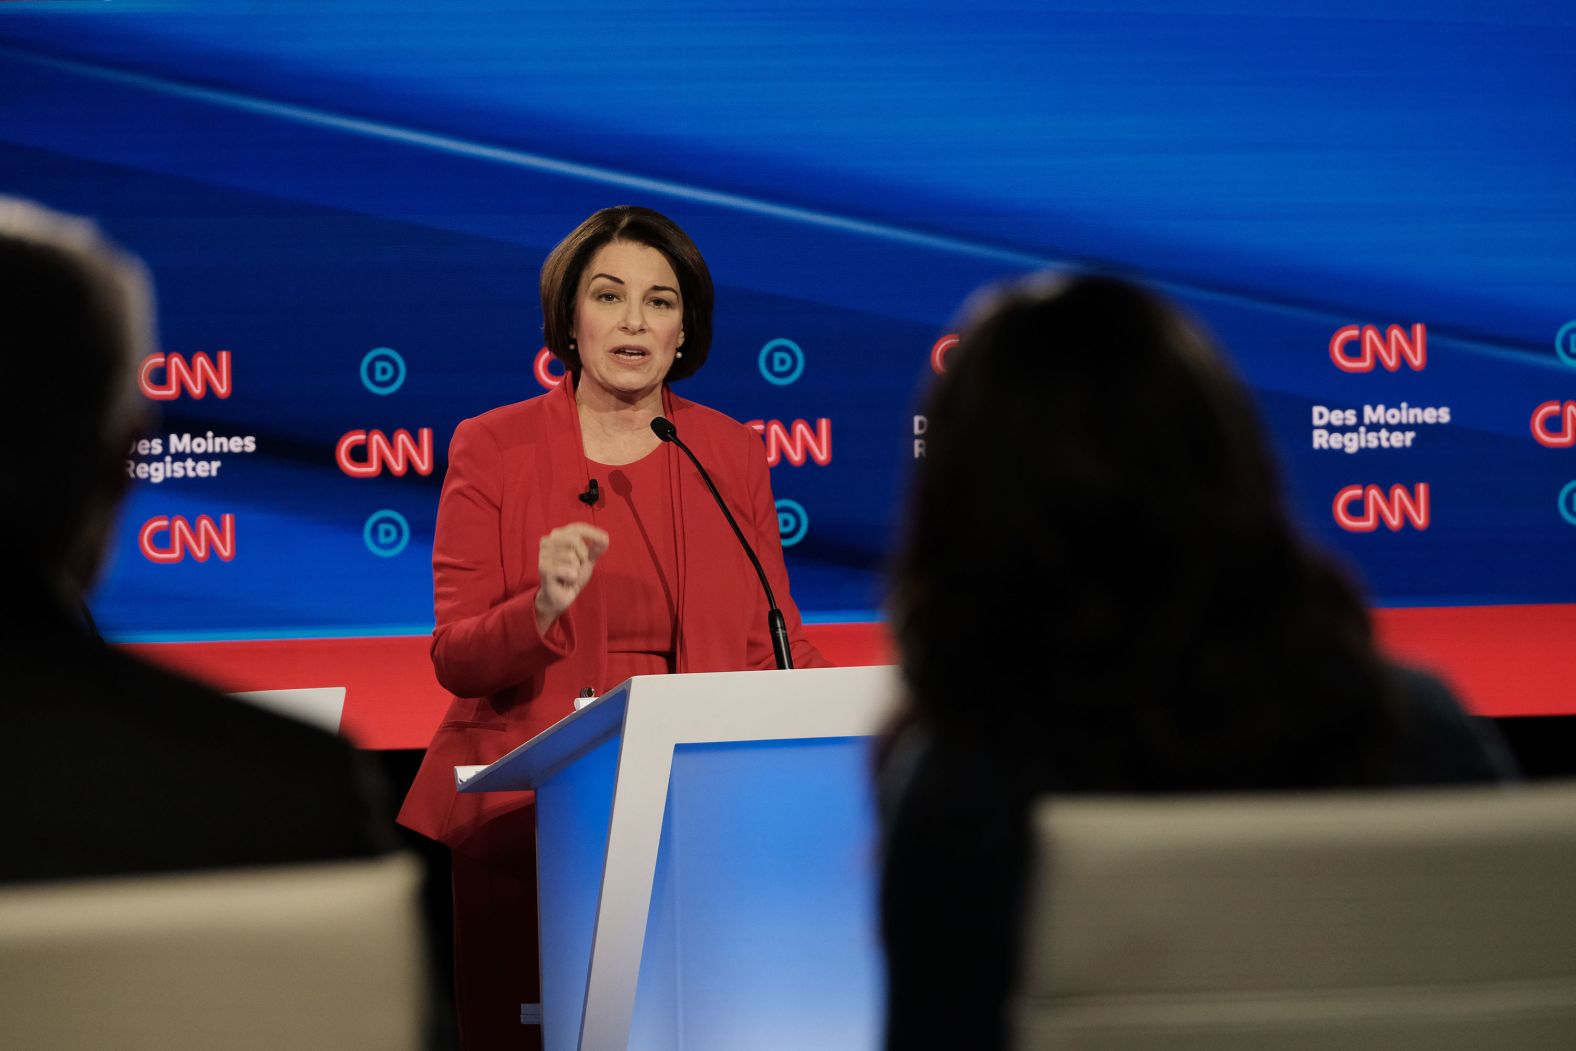 Klobuchar said she's often heard that a woman cannot win. "I point out that you don't have to be the tallest person in the world — James Madison was 5-4," <a href="index.php?page=&url=https%3A%2F%2Fwww.cnn.com%2Fpolitics%2Flive-news%2Fjanuary-democratic-debate-live%2Fh_6565187c6a7b45fc24a2ddc0f0cfab96" target="_blank">said the US senator from Minnesota.</a> "You don't have to be the skinniest person in the room. You don't have to be the loudest person. You have to be competent."